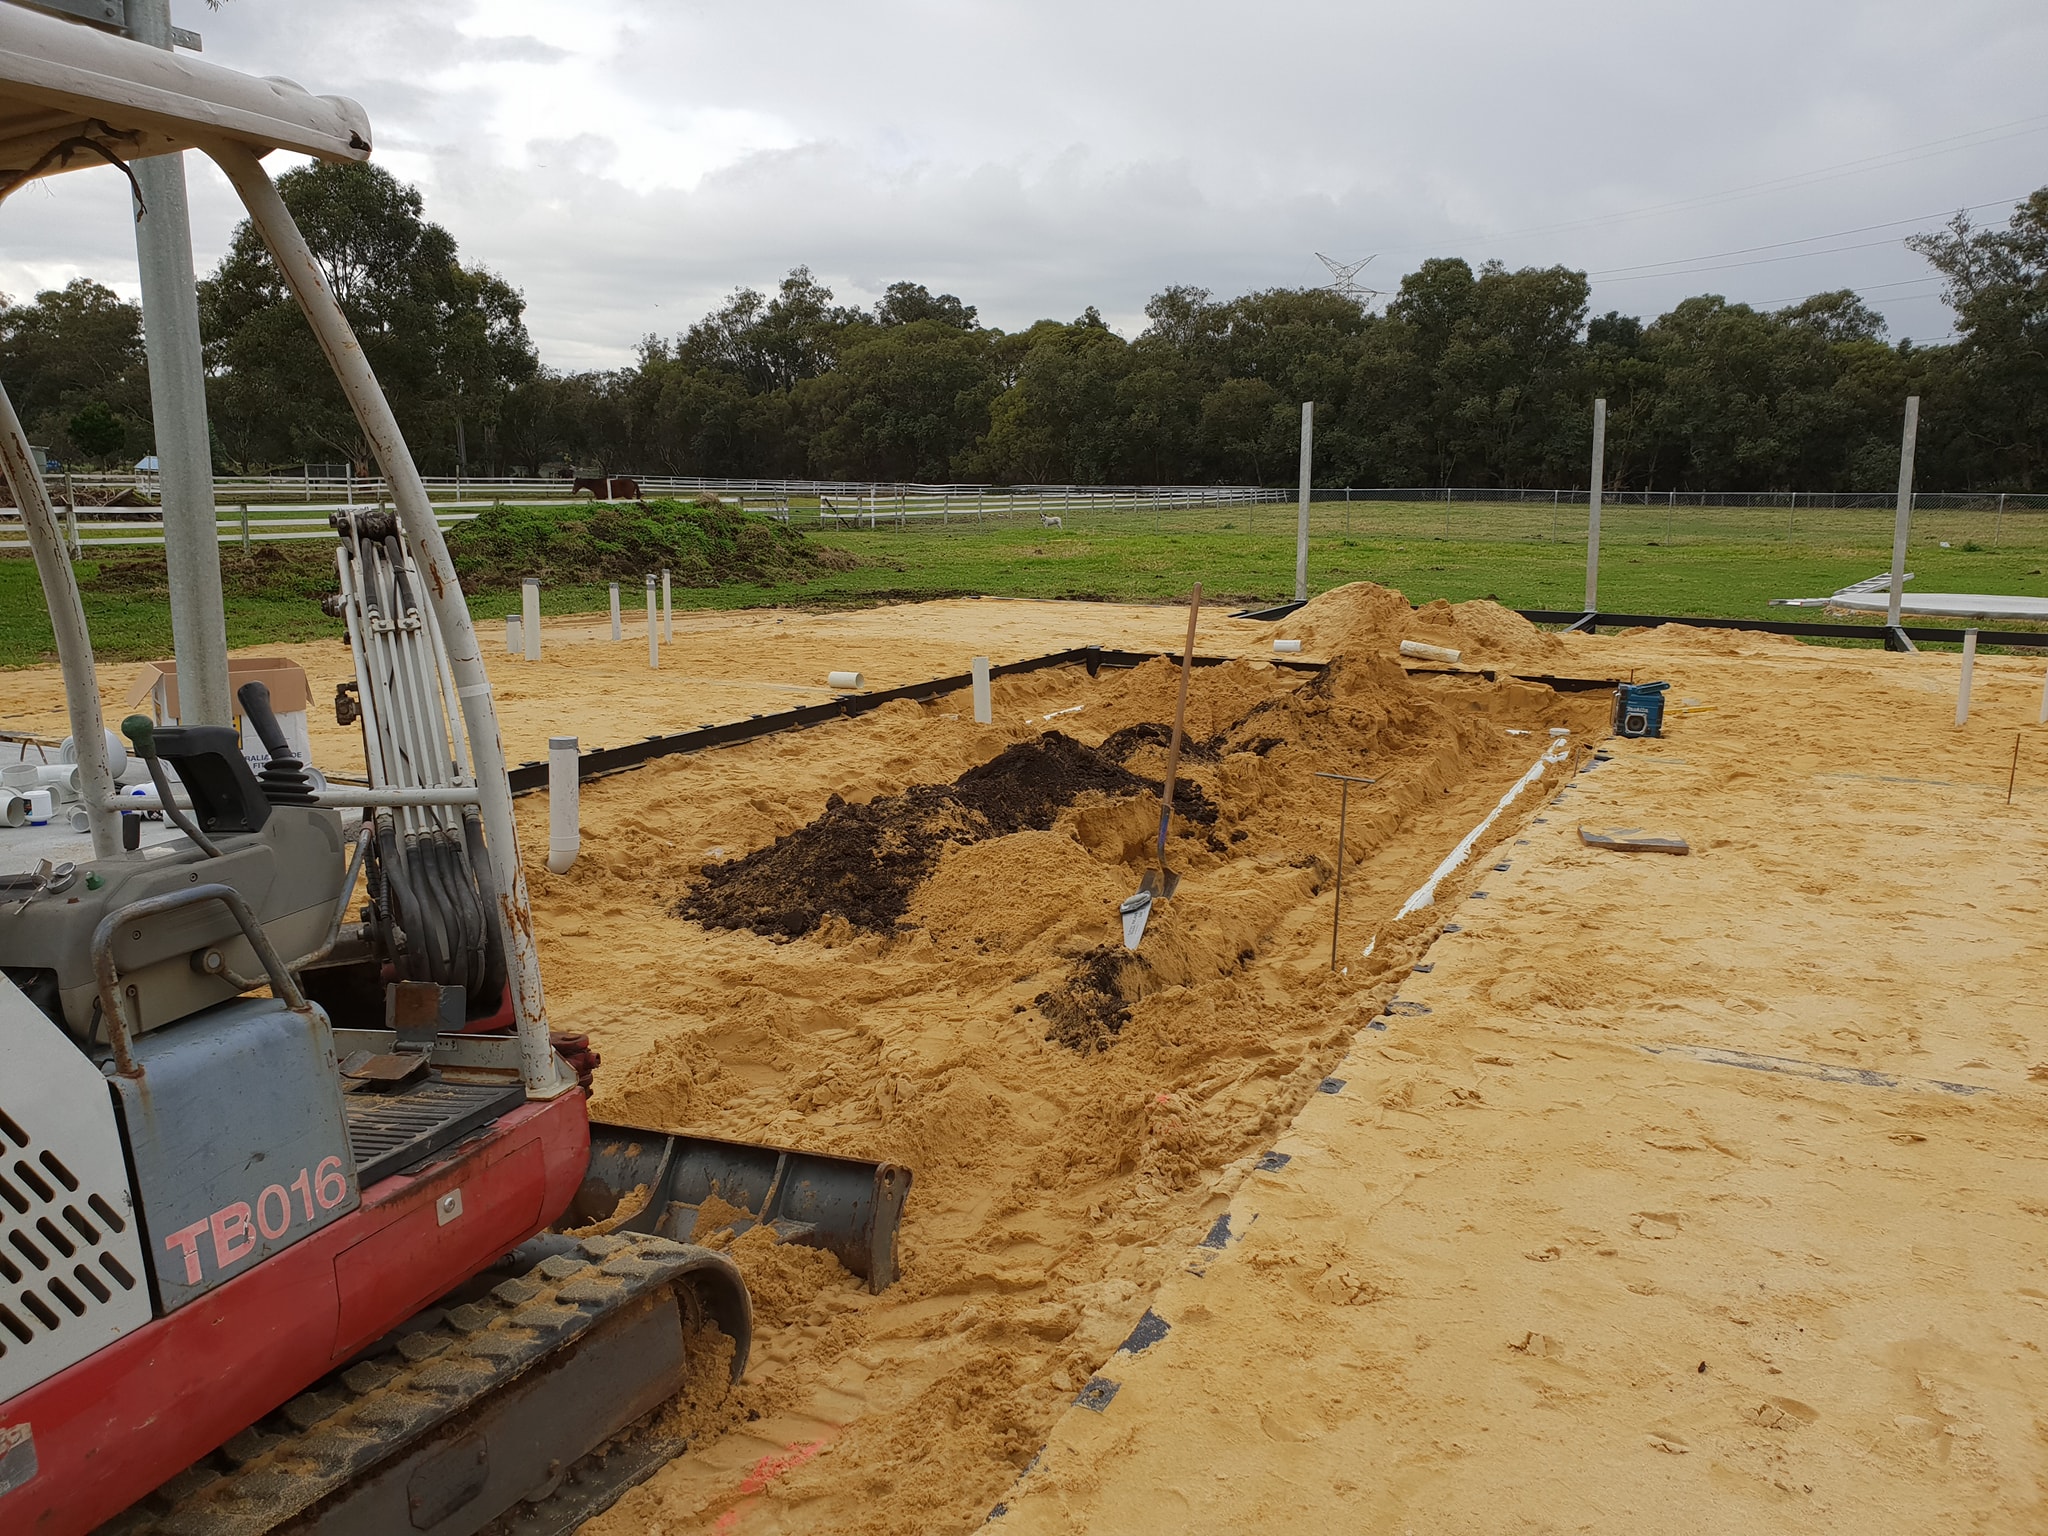 Frecks Plumbing and Gas - Excavator for digging trenches, replacing water pipes and drainage